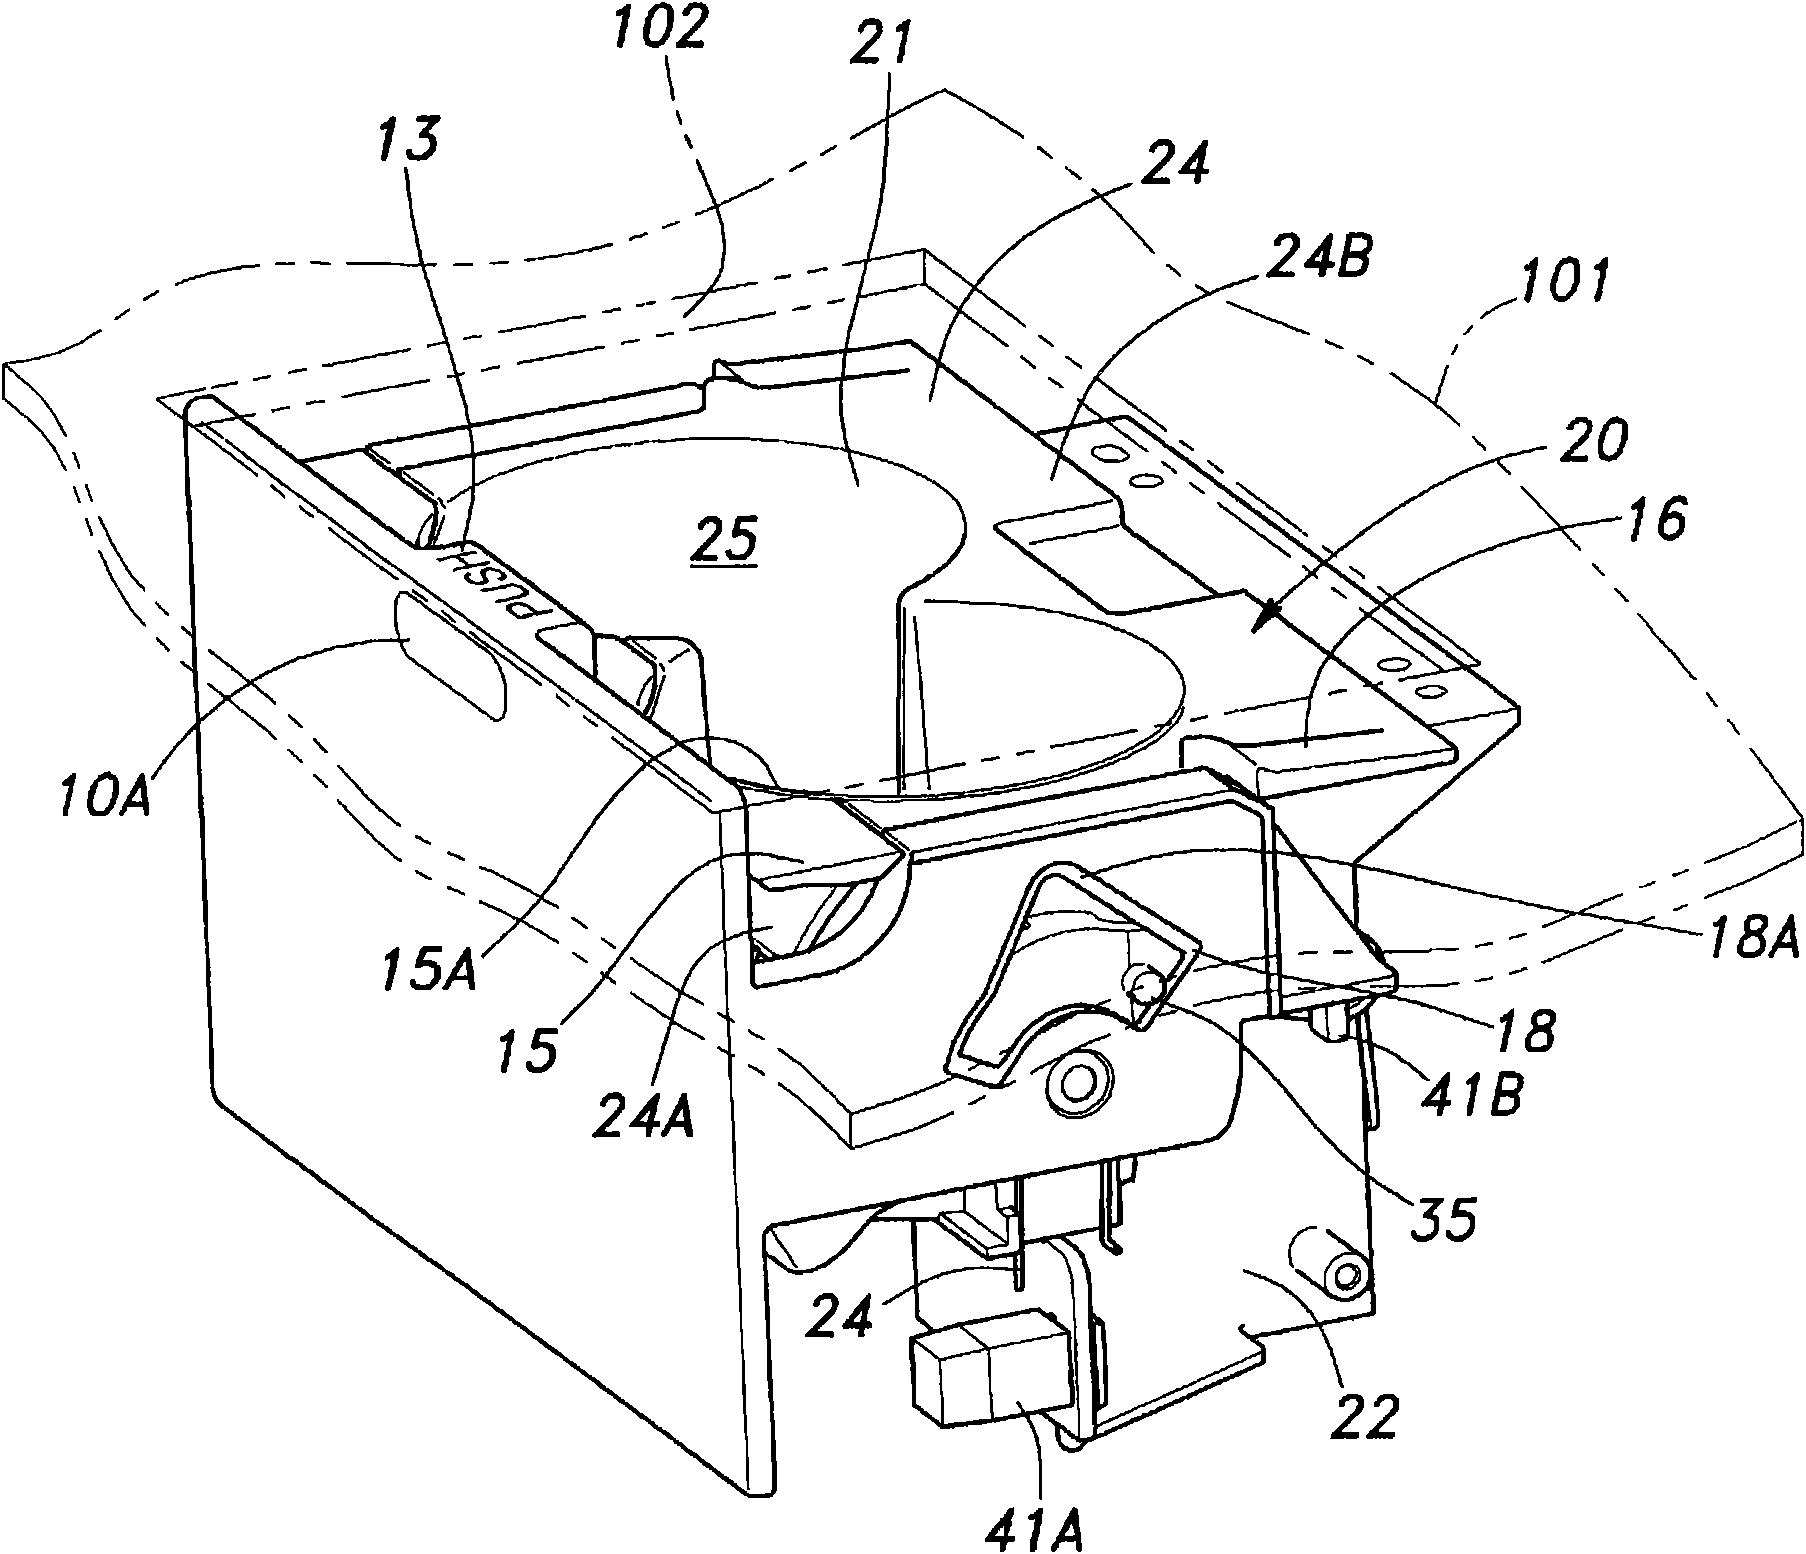 Lid opening and closing device